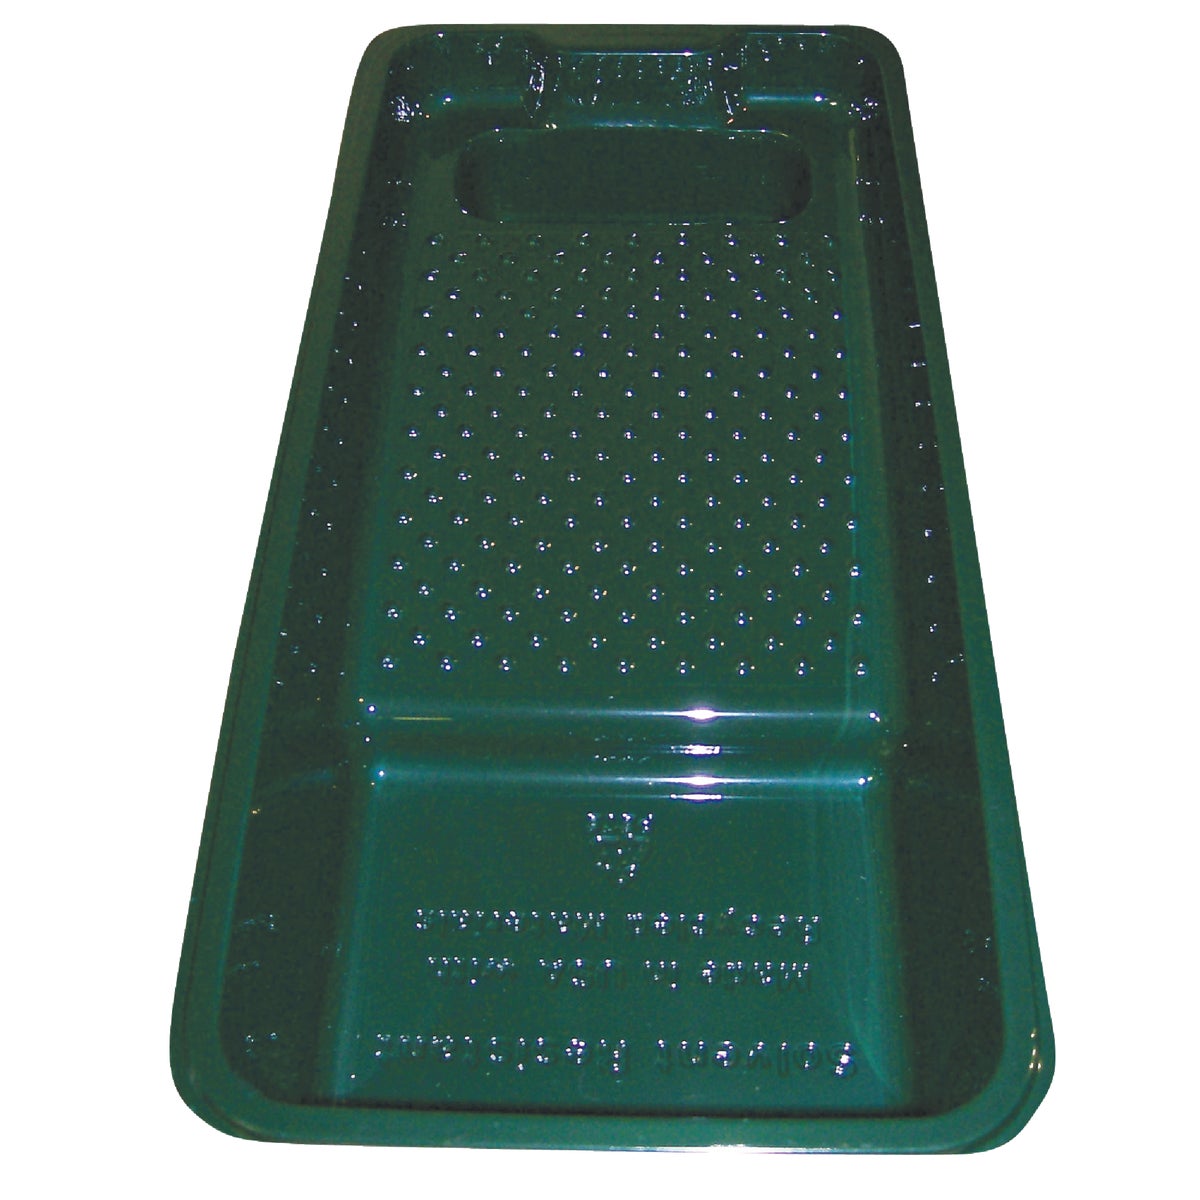 Item 778534, A convenient sturdy plastic tray for trimming or small paint projects.